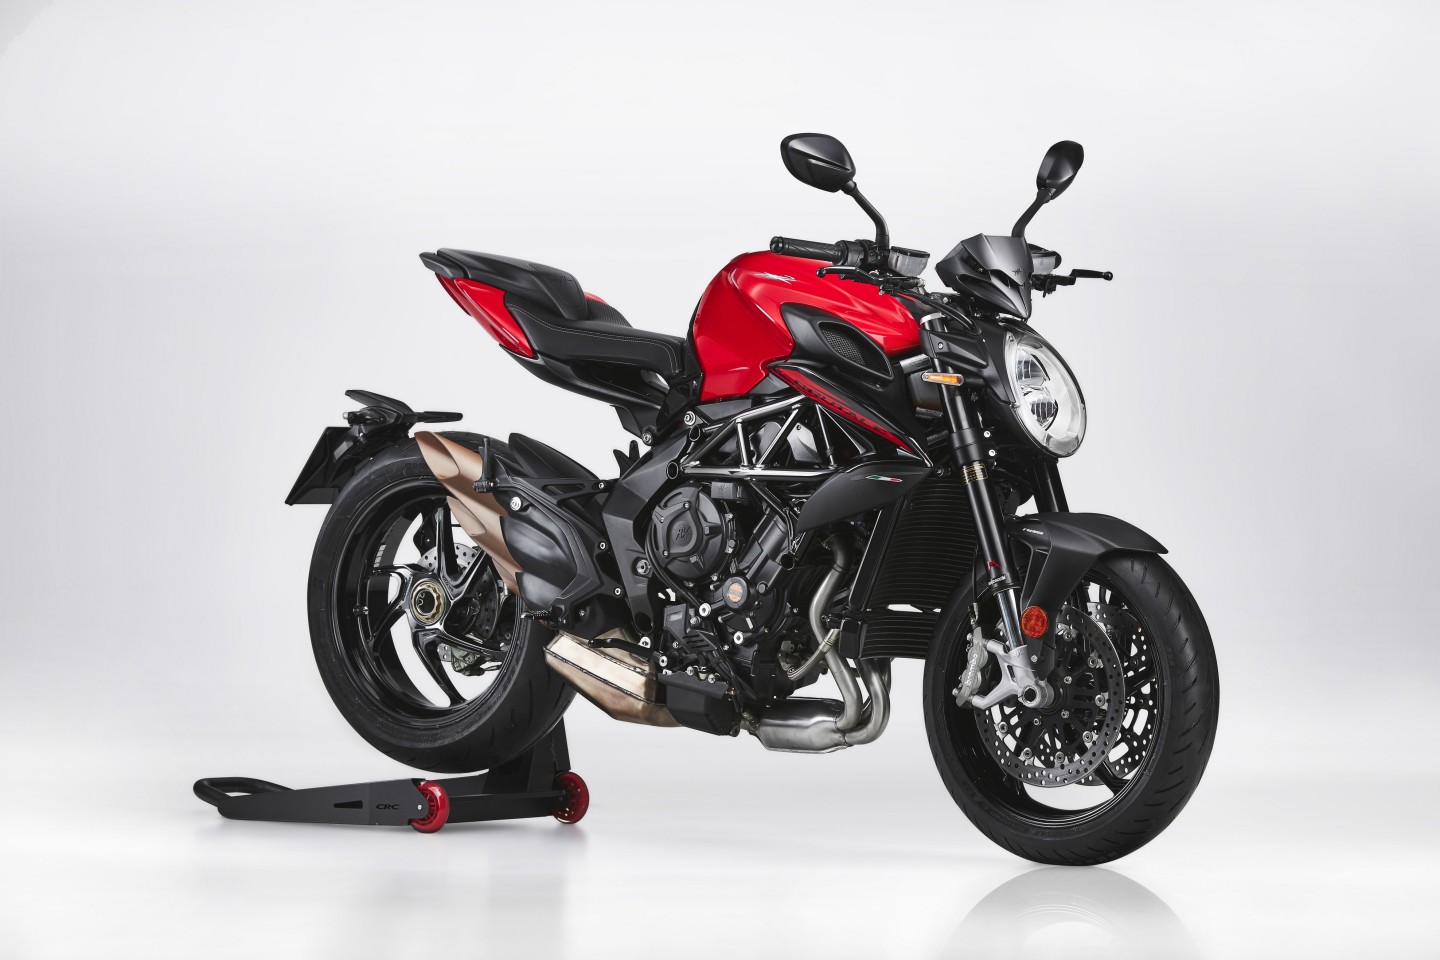 The Rosso the most affordable of the 2021 MV Agusta Brutale family